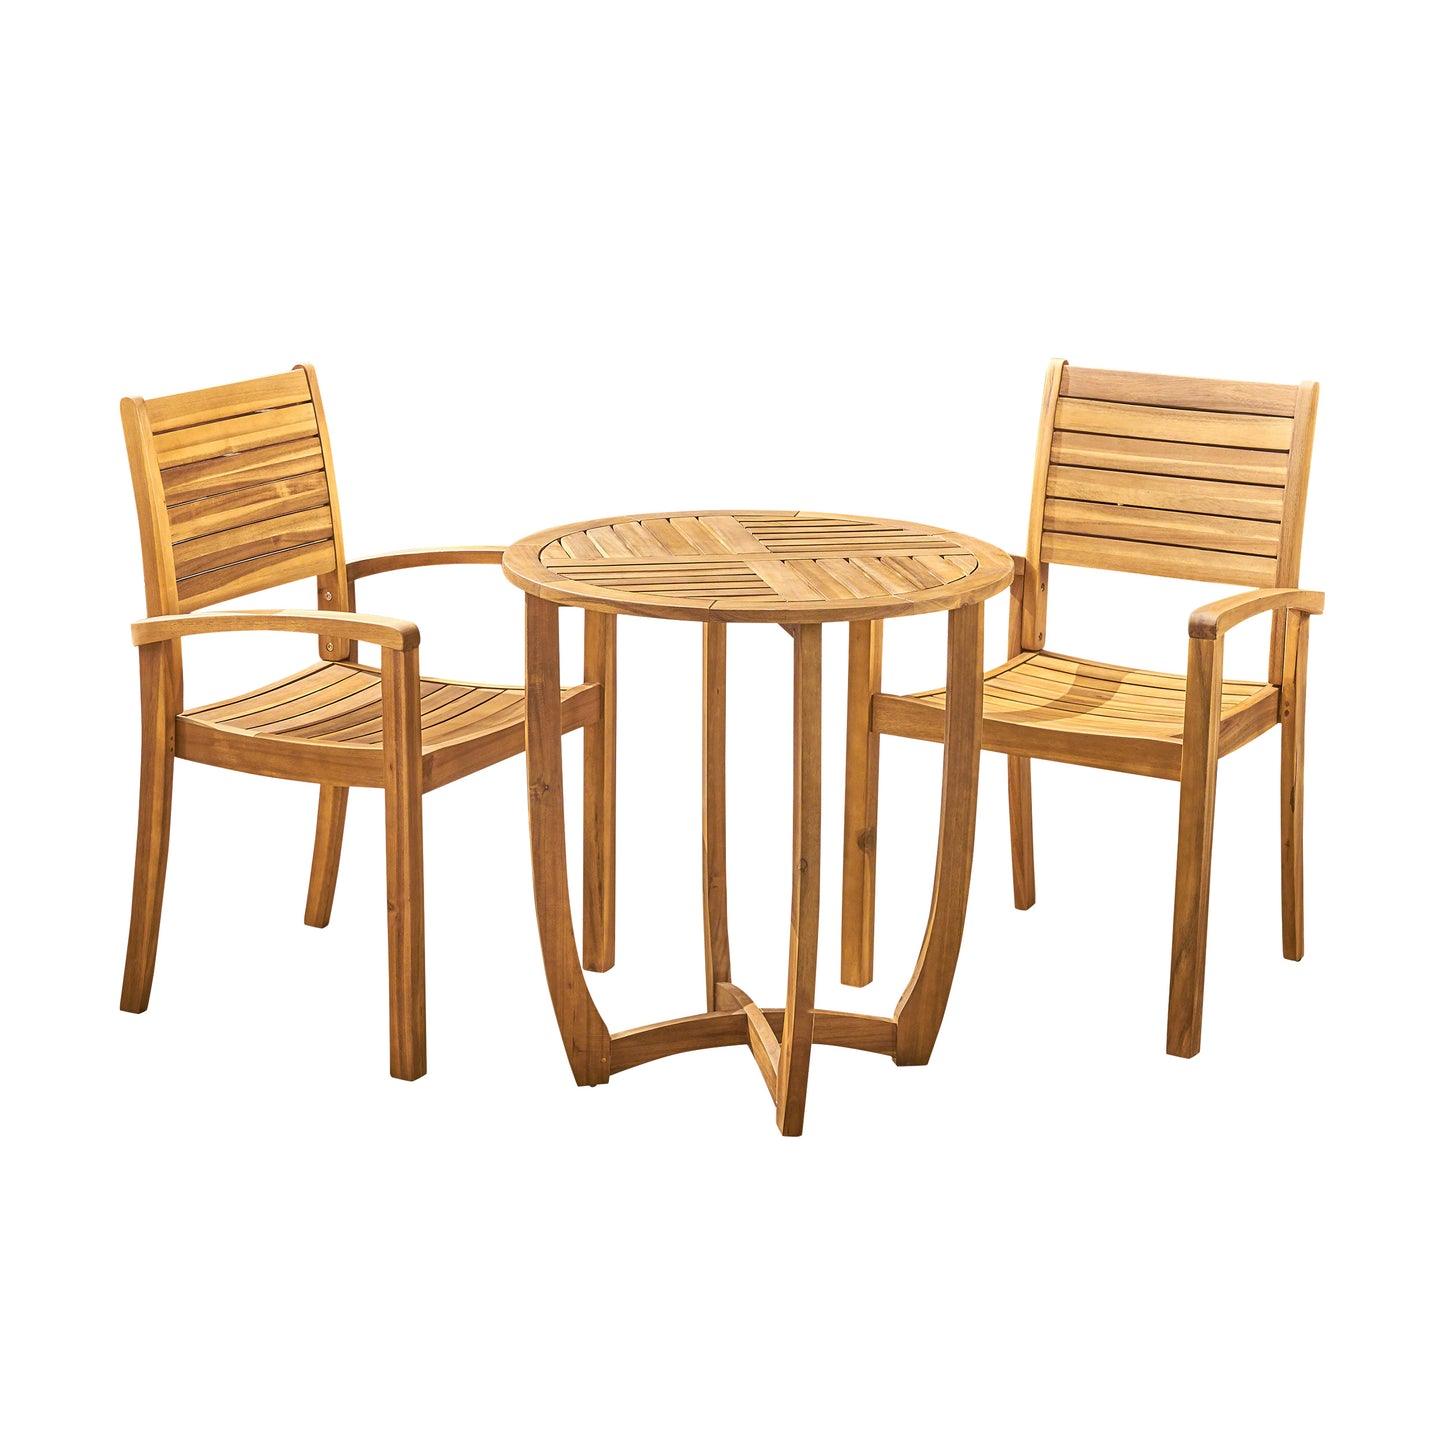 Cathy Outdoor 2-Seater Acacia Wood Bistro Set